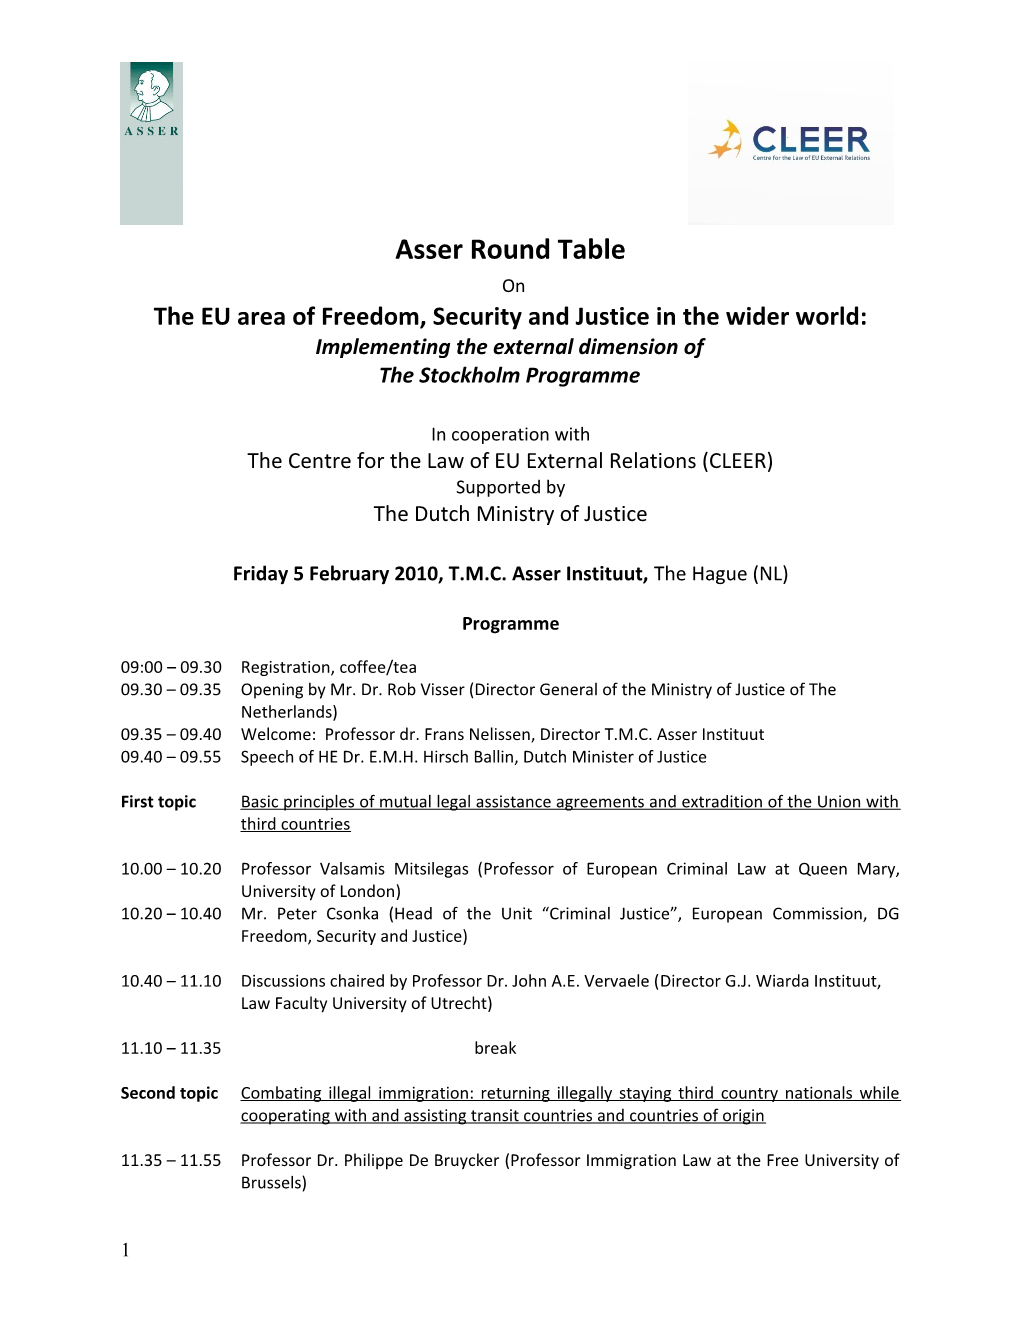 The EU Area of Freedom, Security and Justice in the Wider World